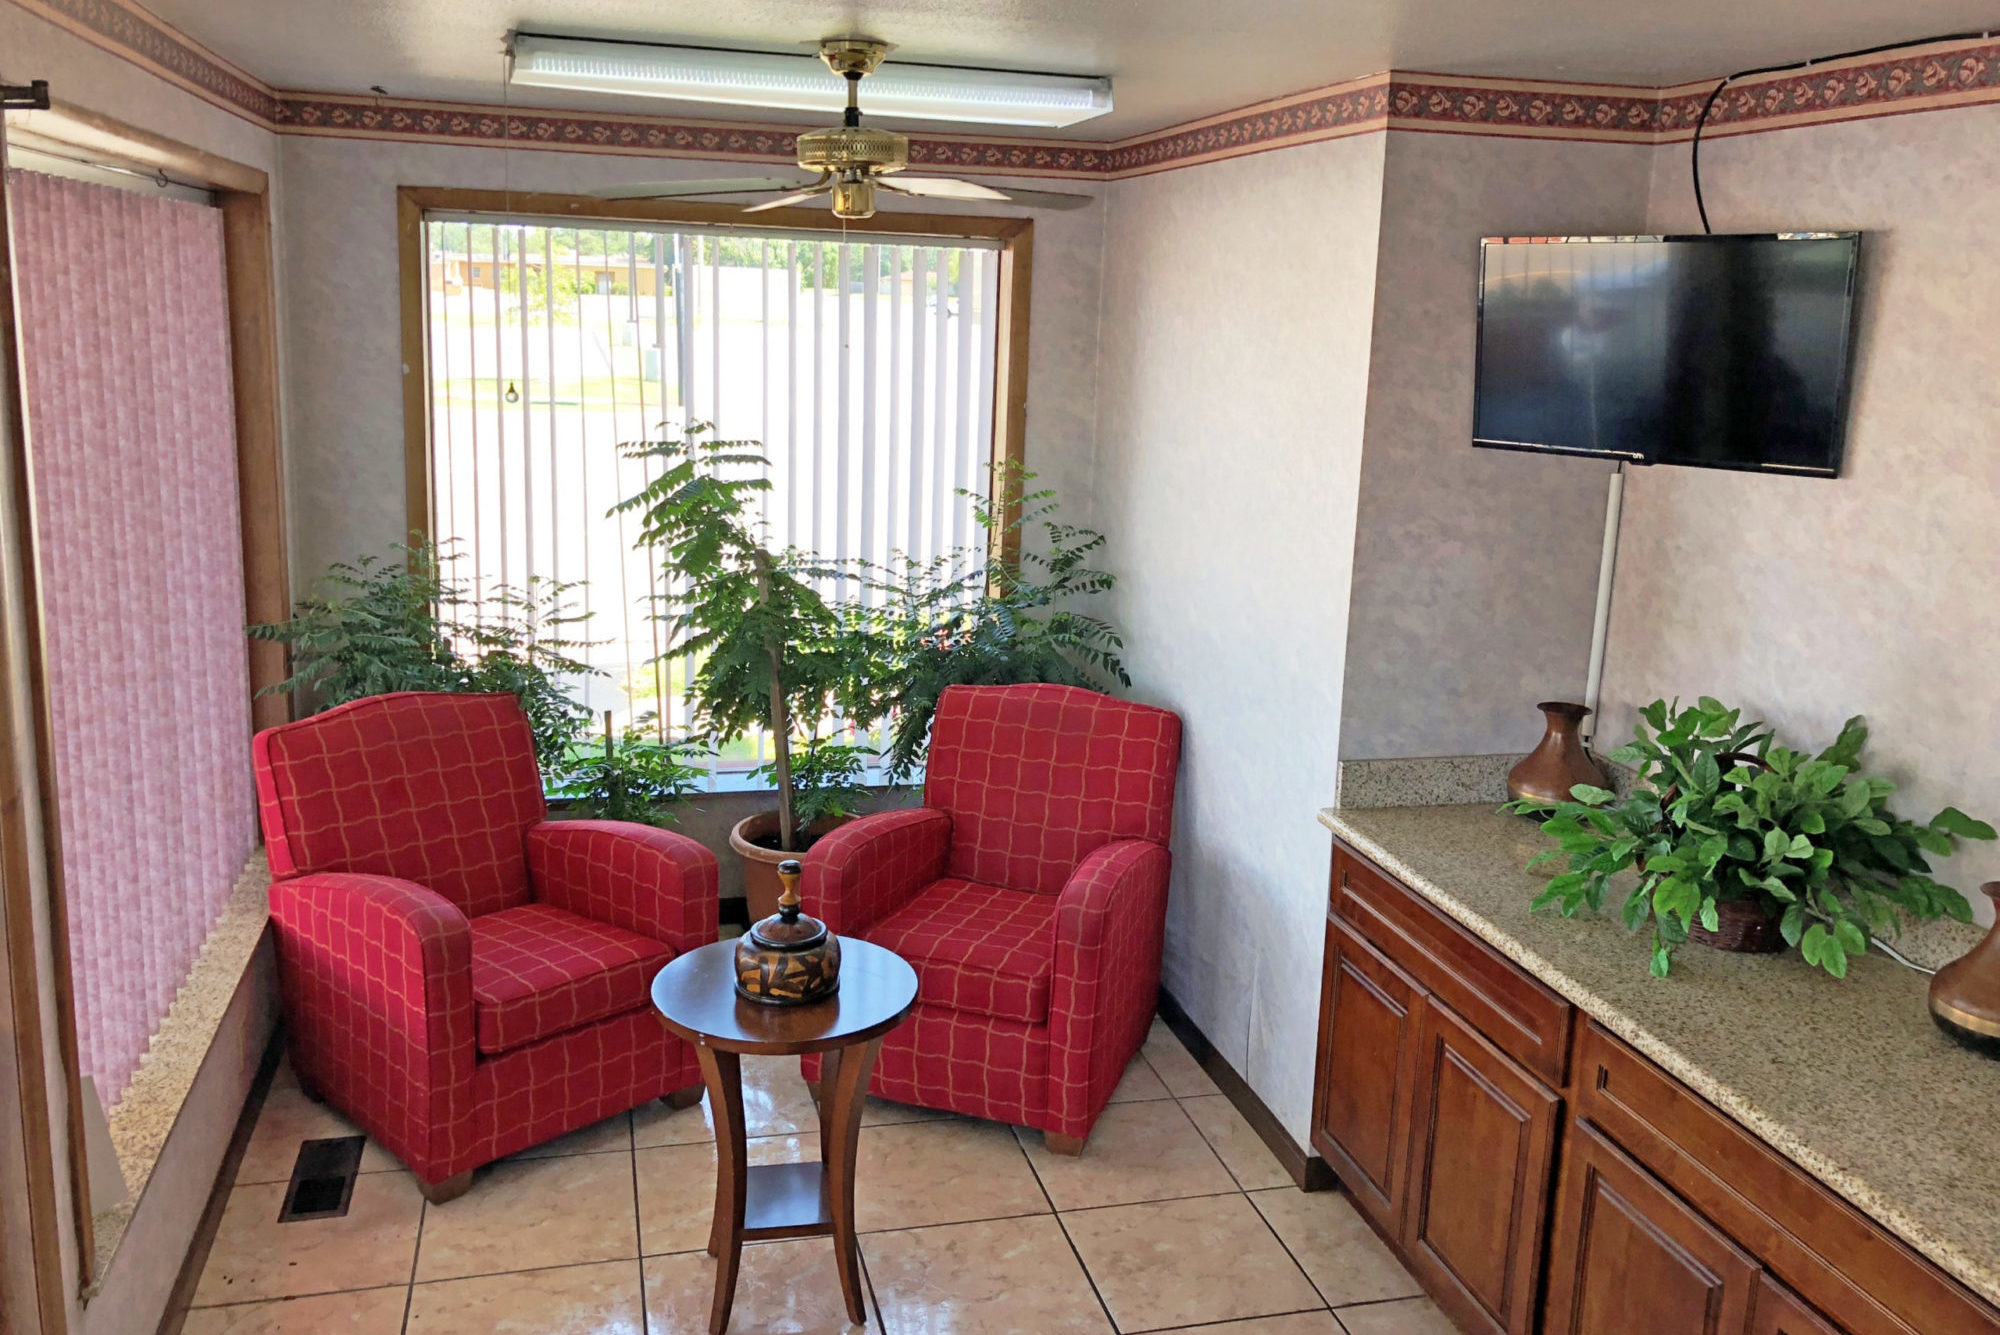 Easy chairs, occasional table, potted plants, wall mounted flat screen tv, counter top with plants, tiled flooring